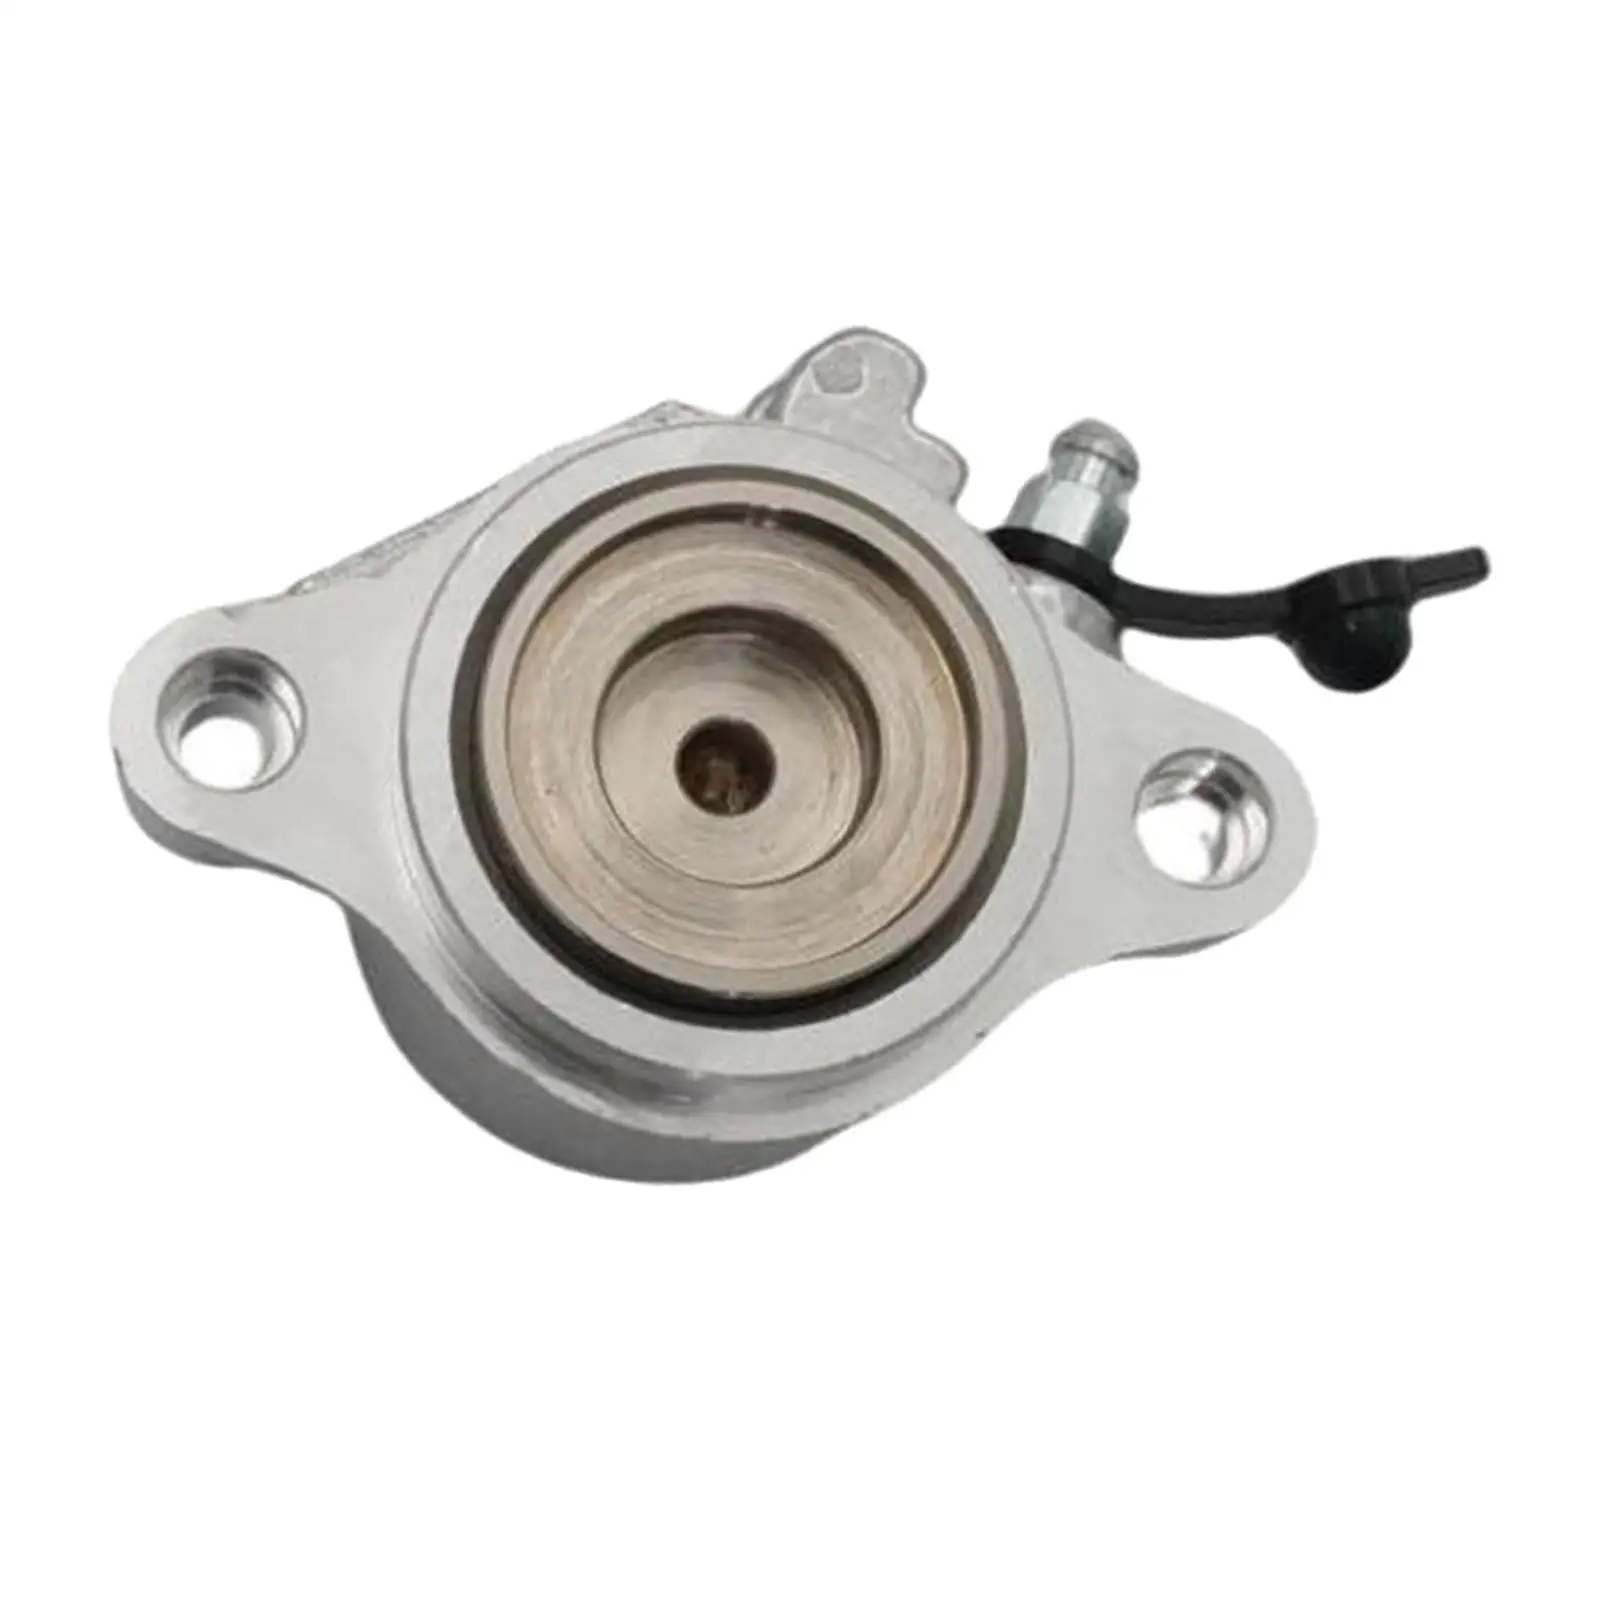 Clutch Release Cylinder 23160-38B01 Easy to Install Assembly Direct Replaces for Suzuki 1987-2009 Intruder S83 VS1400 Glp